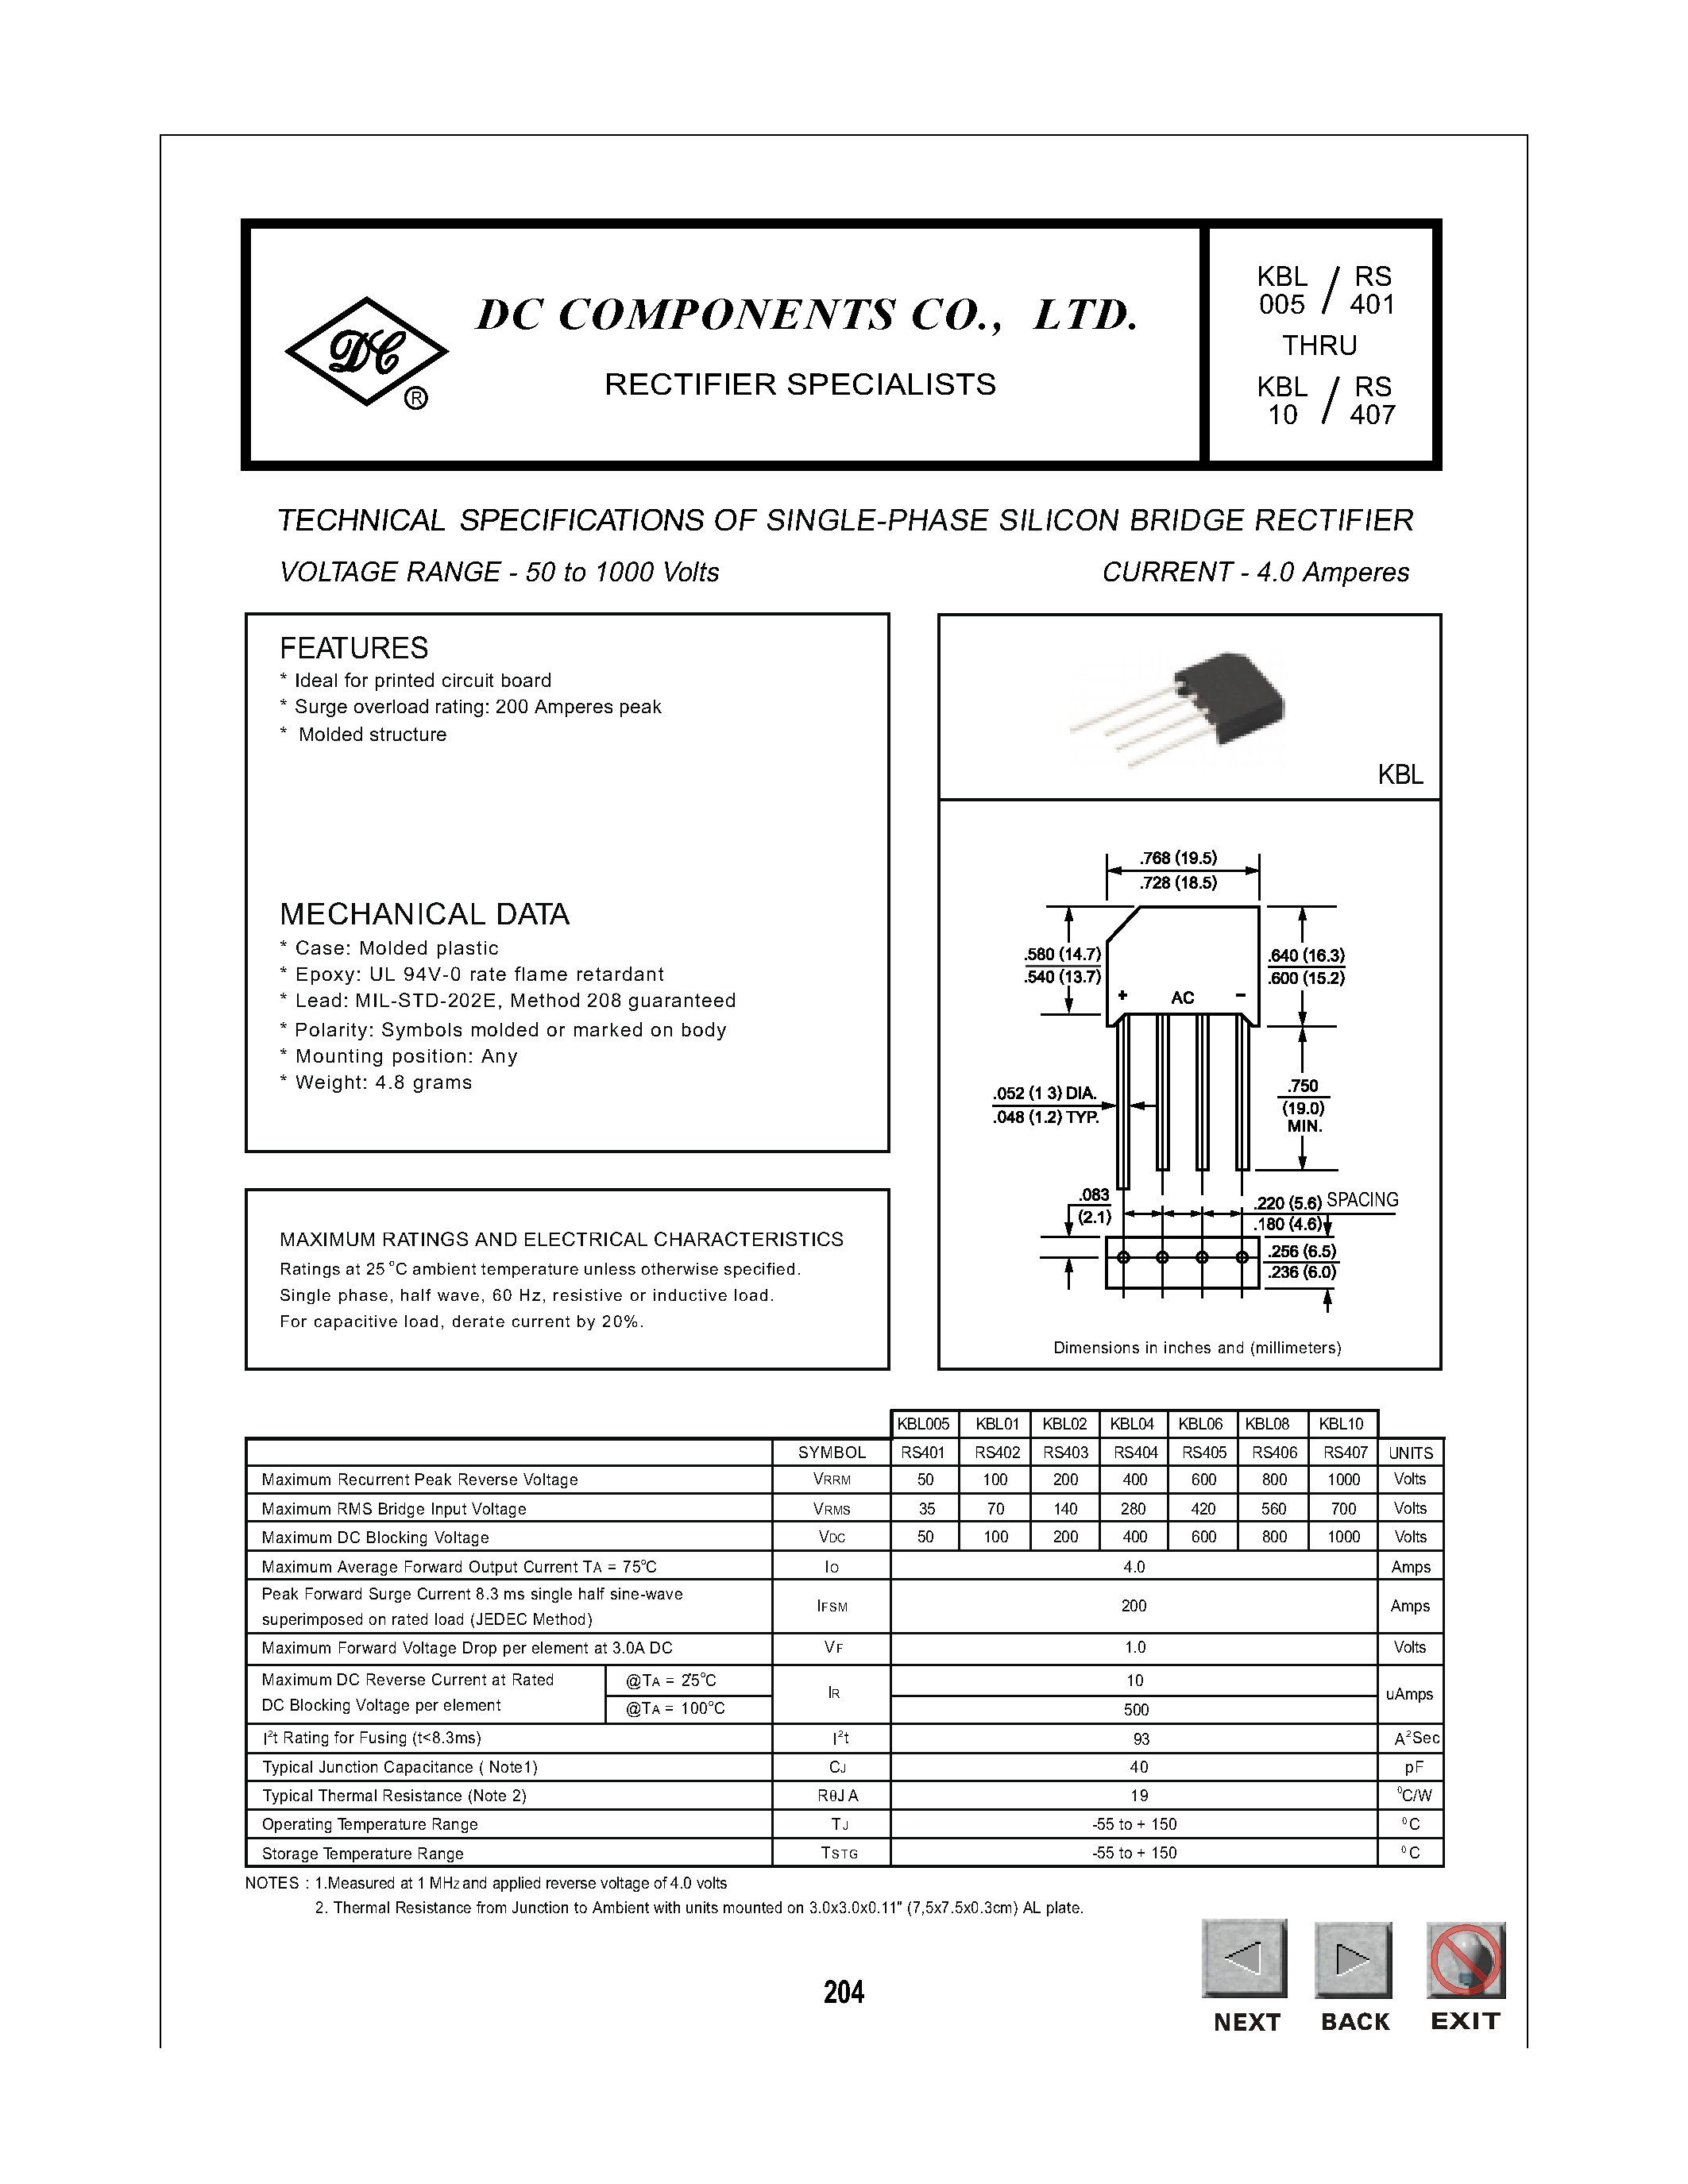 Datasheet KBL02 - TECHNICAL SPECIFICATIONS OF SINGLE-PHASE SILICON BRIDGE RECTIFIER page 1